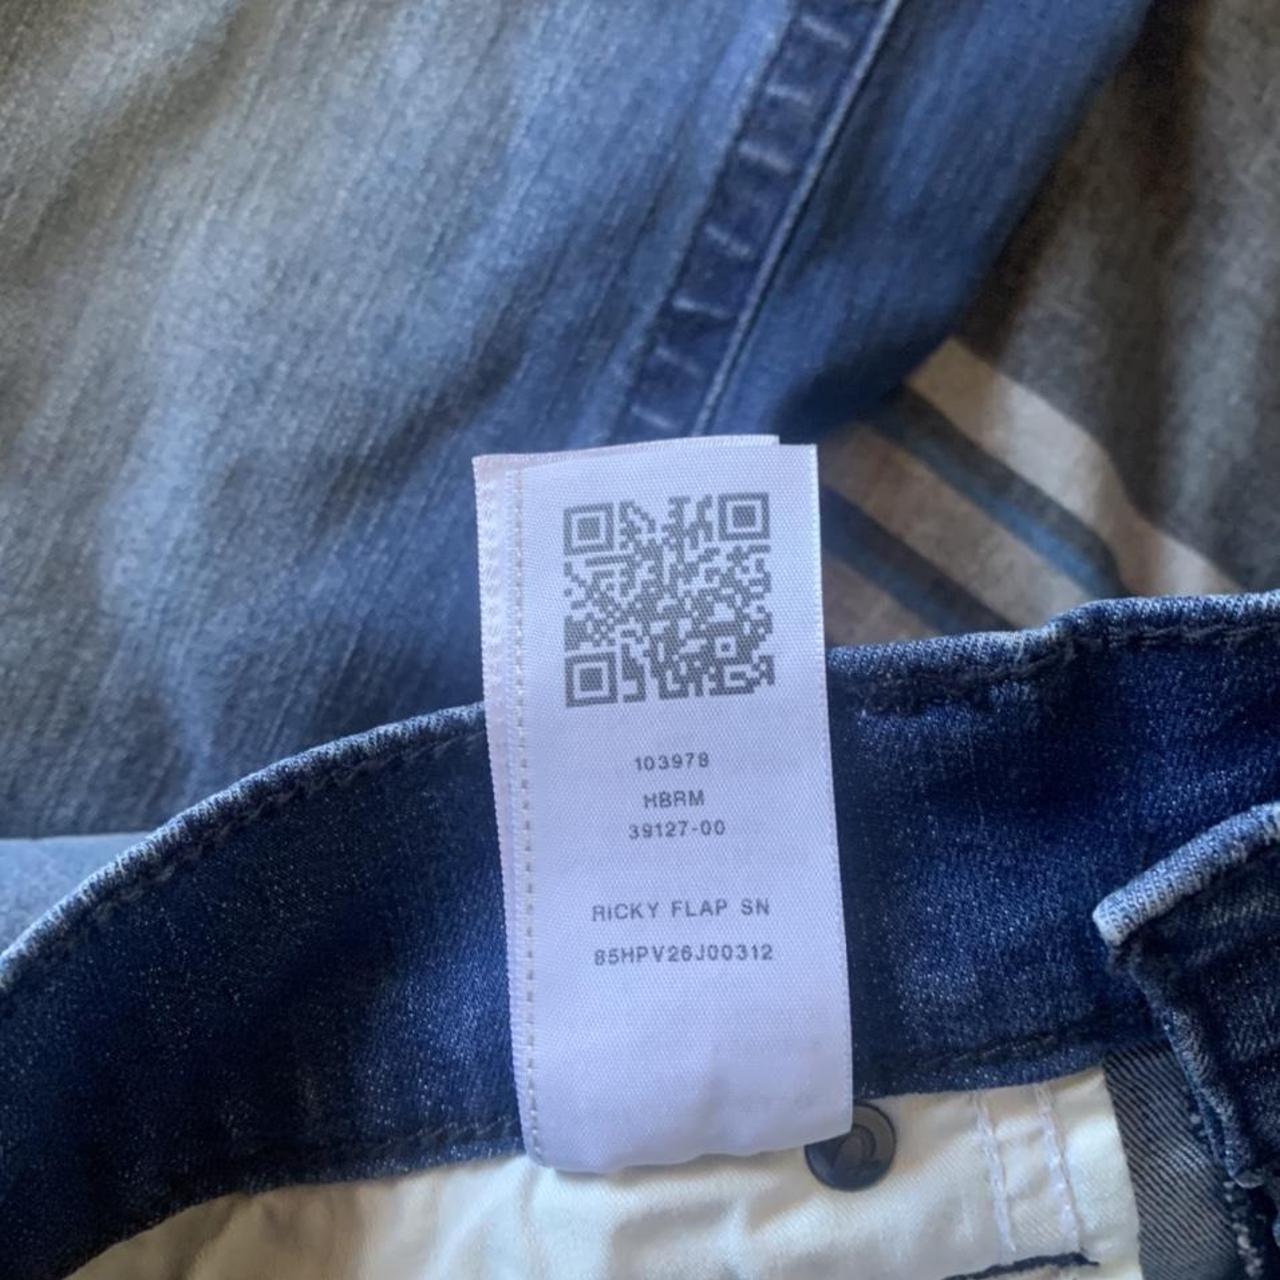 True religion jeans. Brand new with tags brought for... - Depop